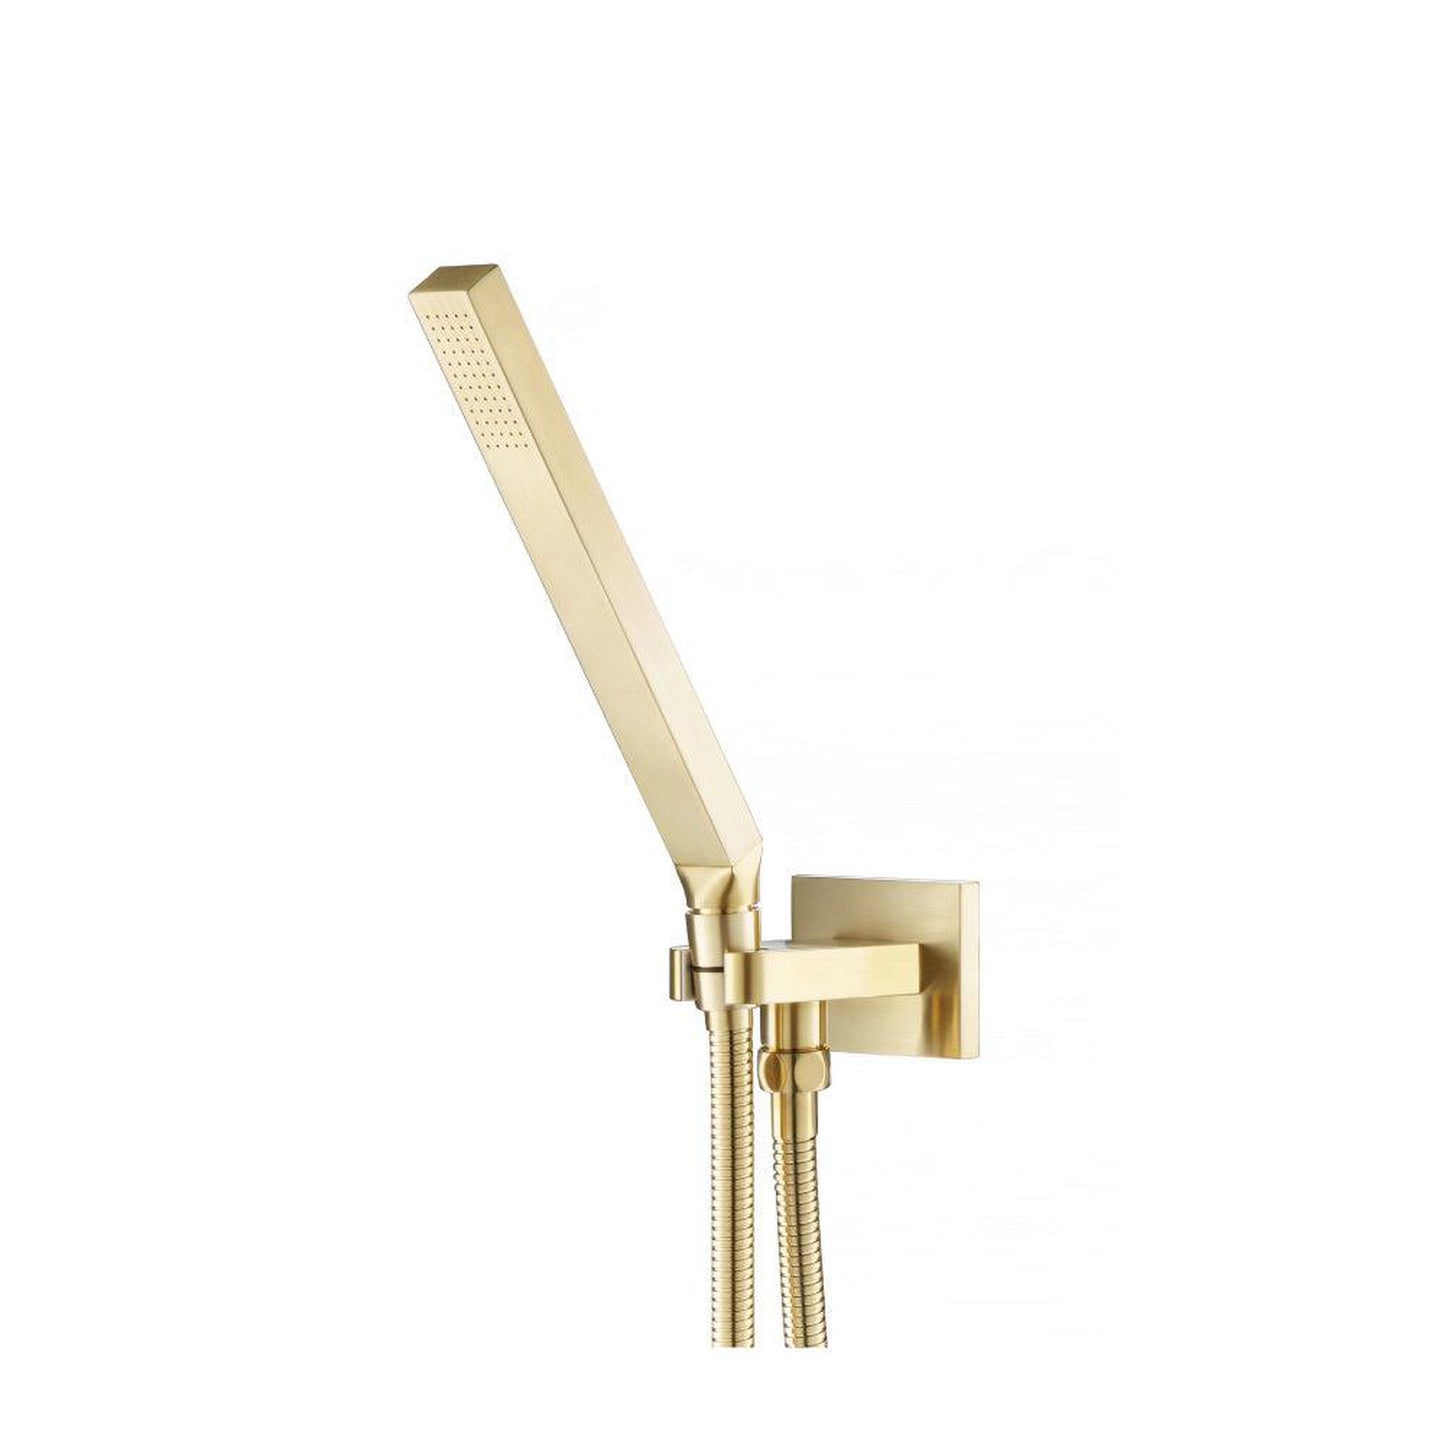 Isenberg Universal Fixtures Hand Shower Set With Wall Elbow, Holder and Hose in Satin Brass (HS1003SB)